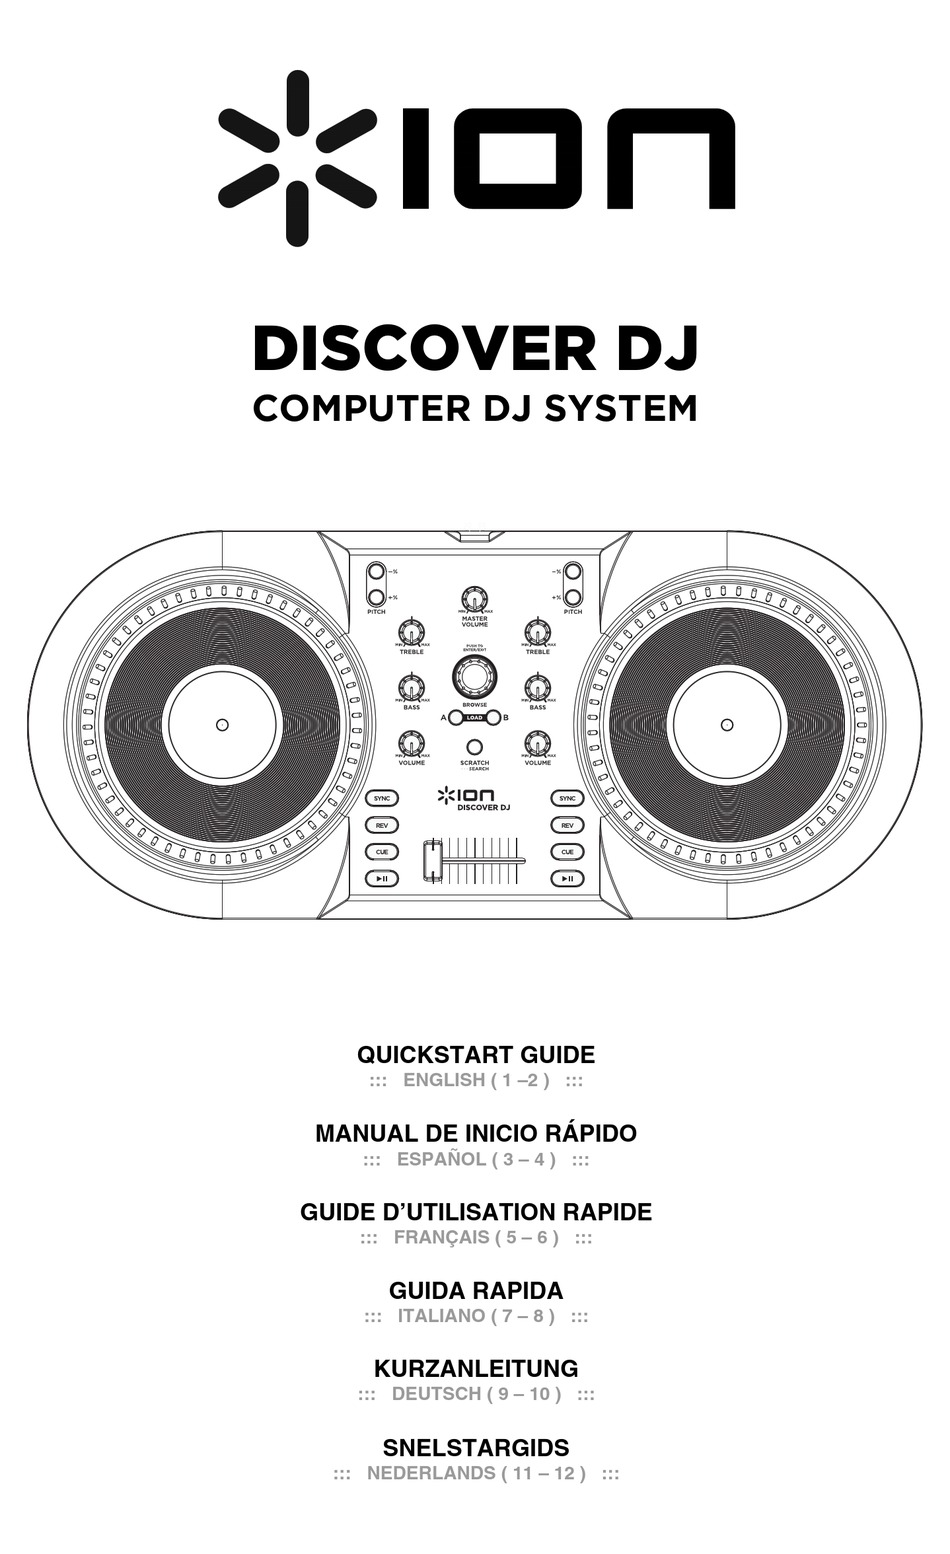 is there any other software compatible with ion discover dj